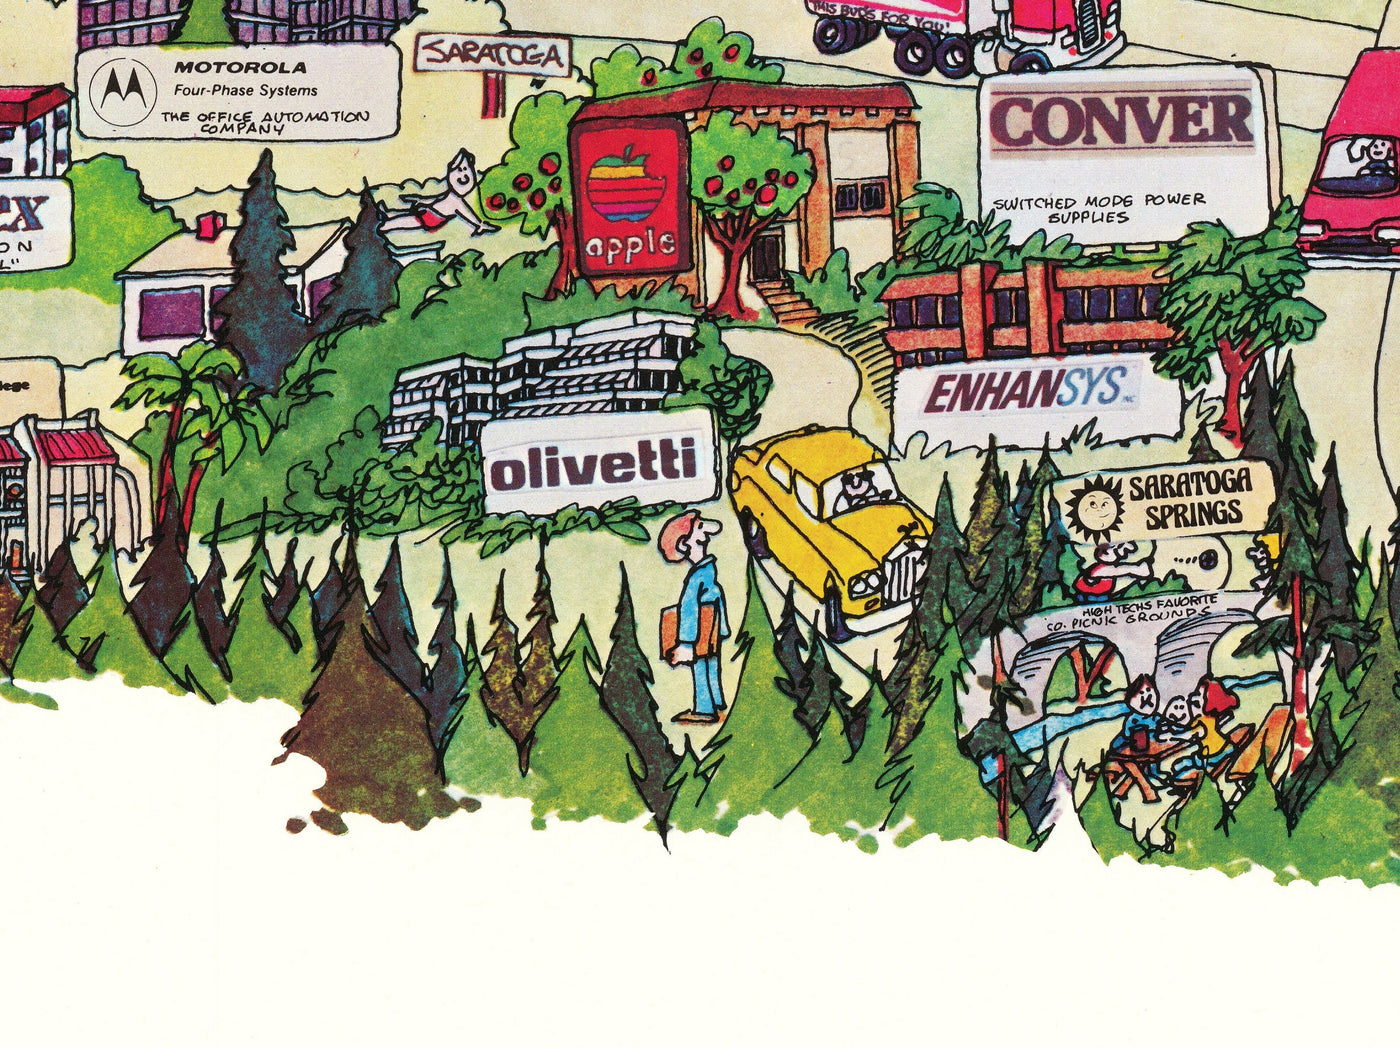 Rare Old Map of Silicon Valley, 1985 - Gráfico pictórico de MountainView, Sunnyvale, Cupertino, San Jose, Fremont